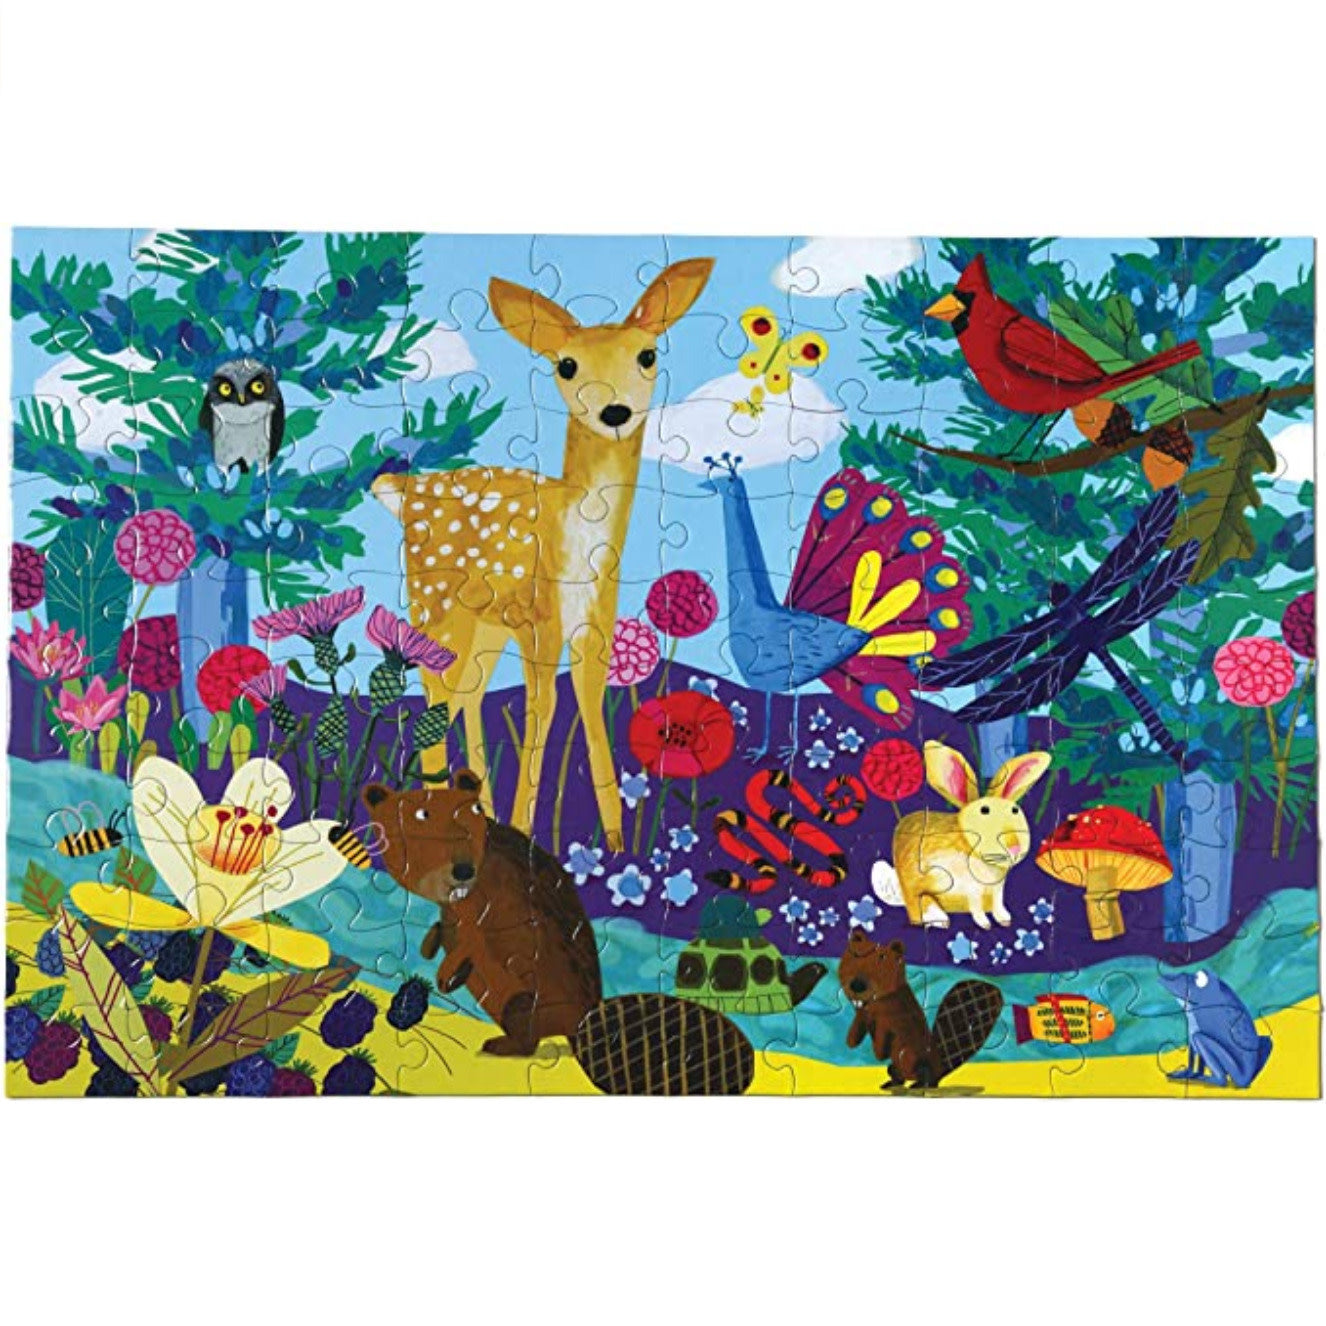 Life on Earth 100 Pc Puzzle